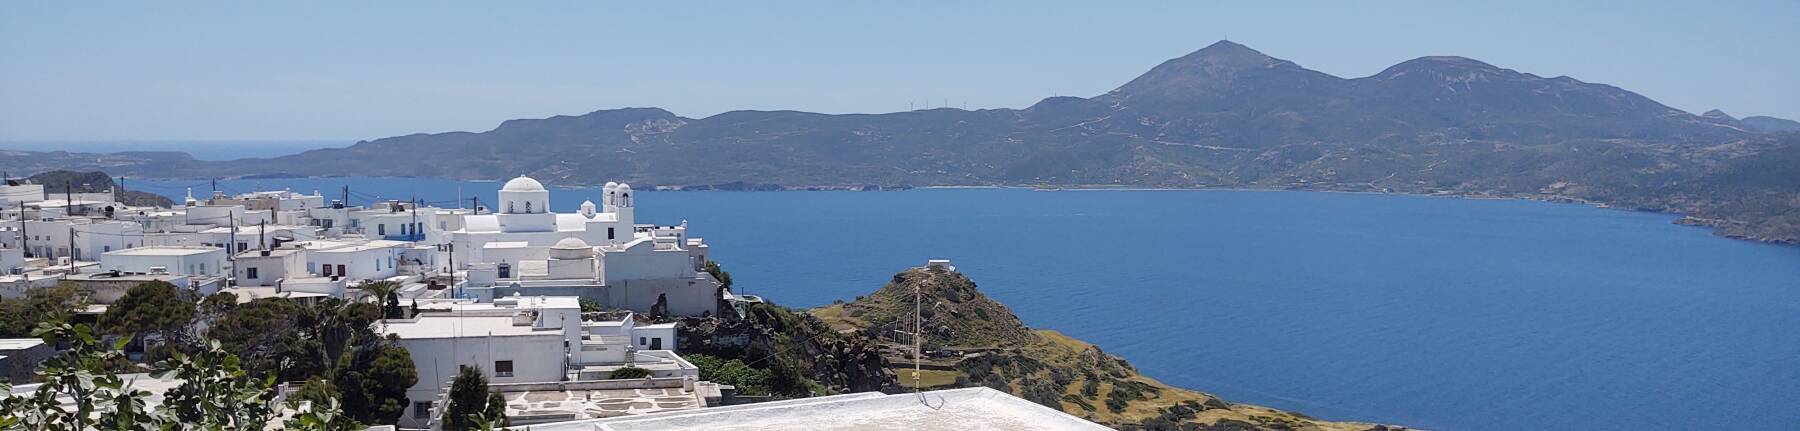 View over the volcanic caldera of Milos from Plaka.